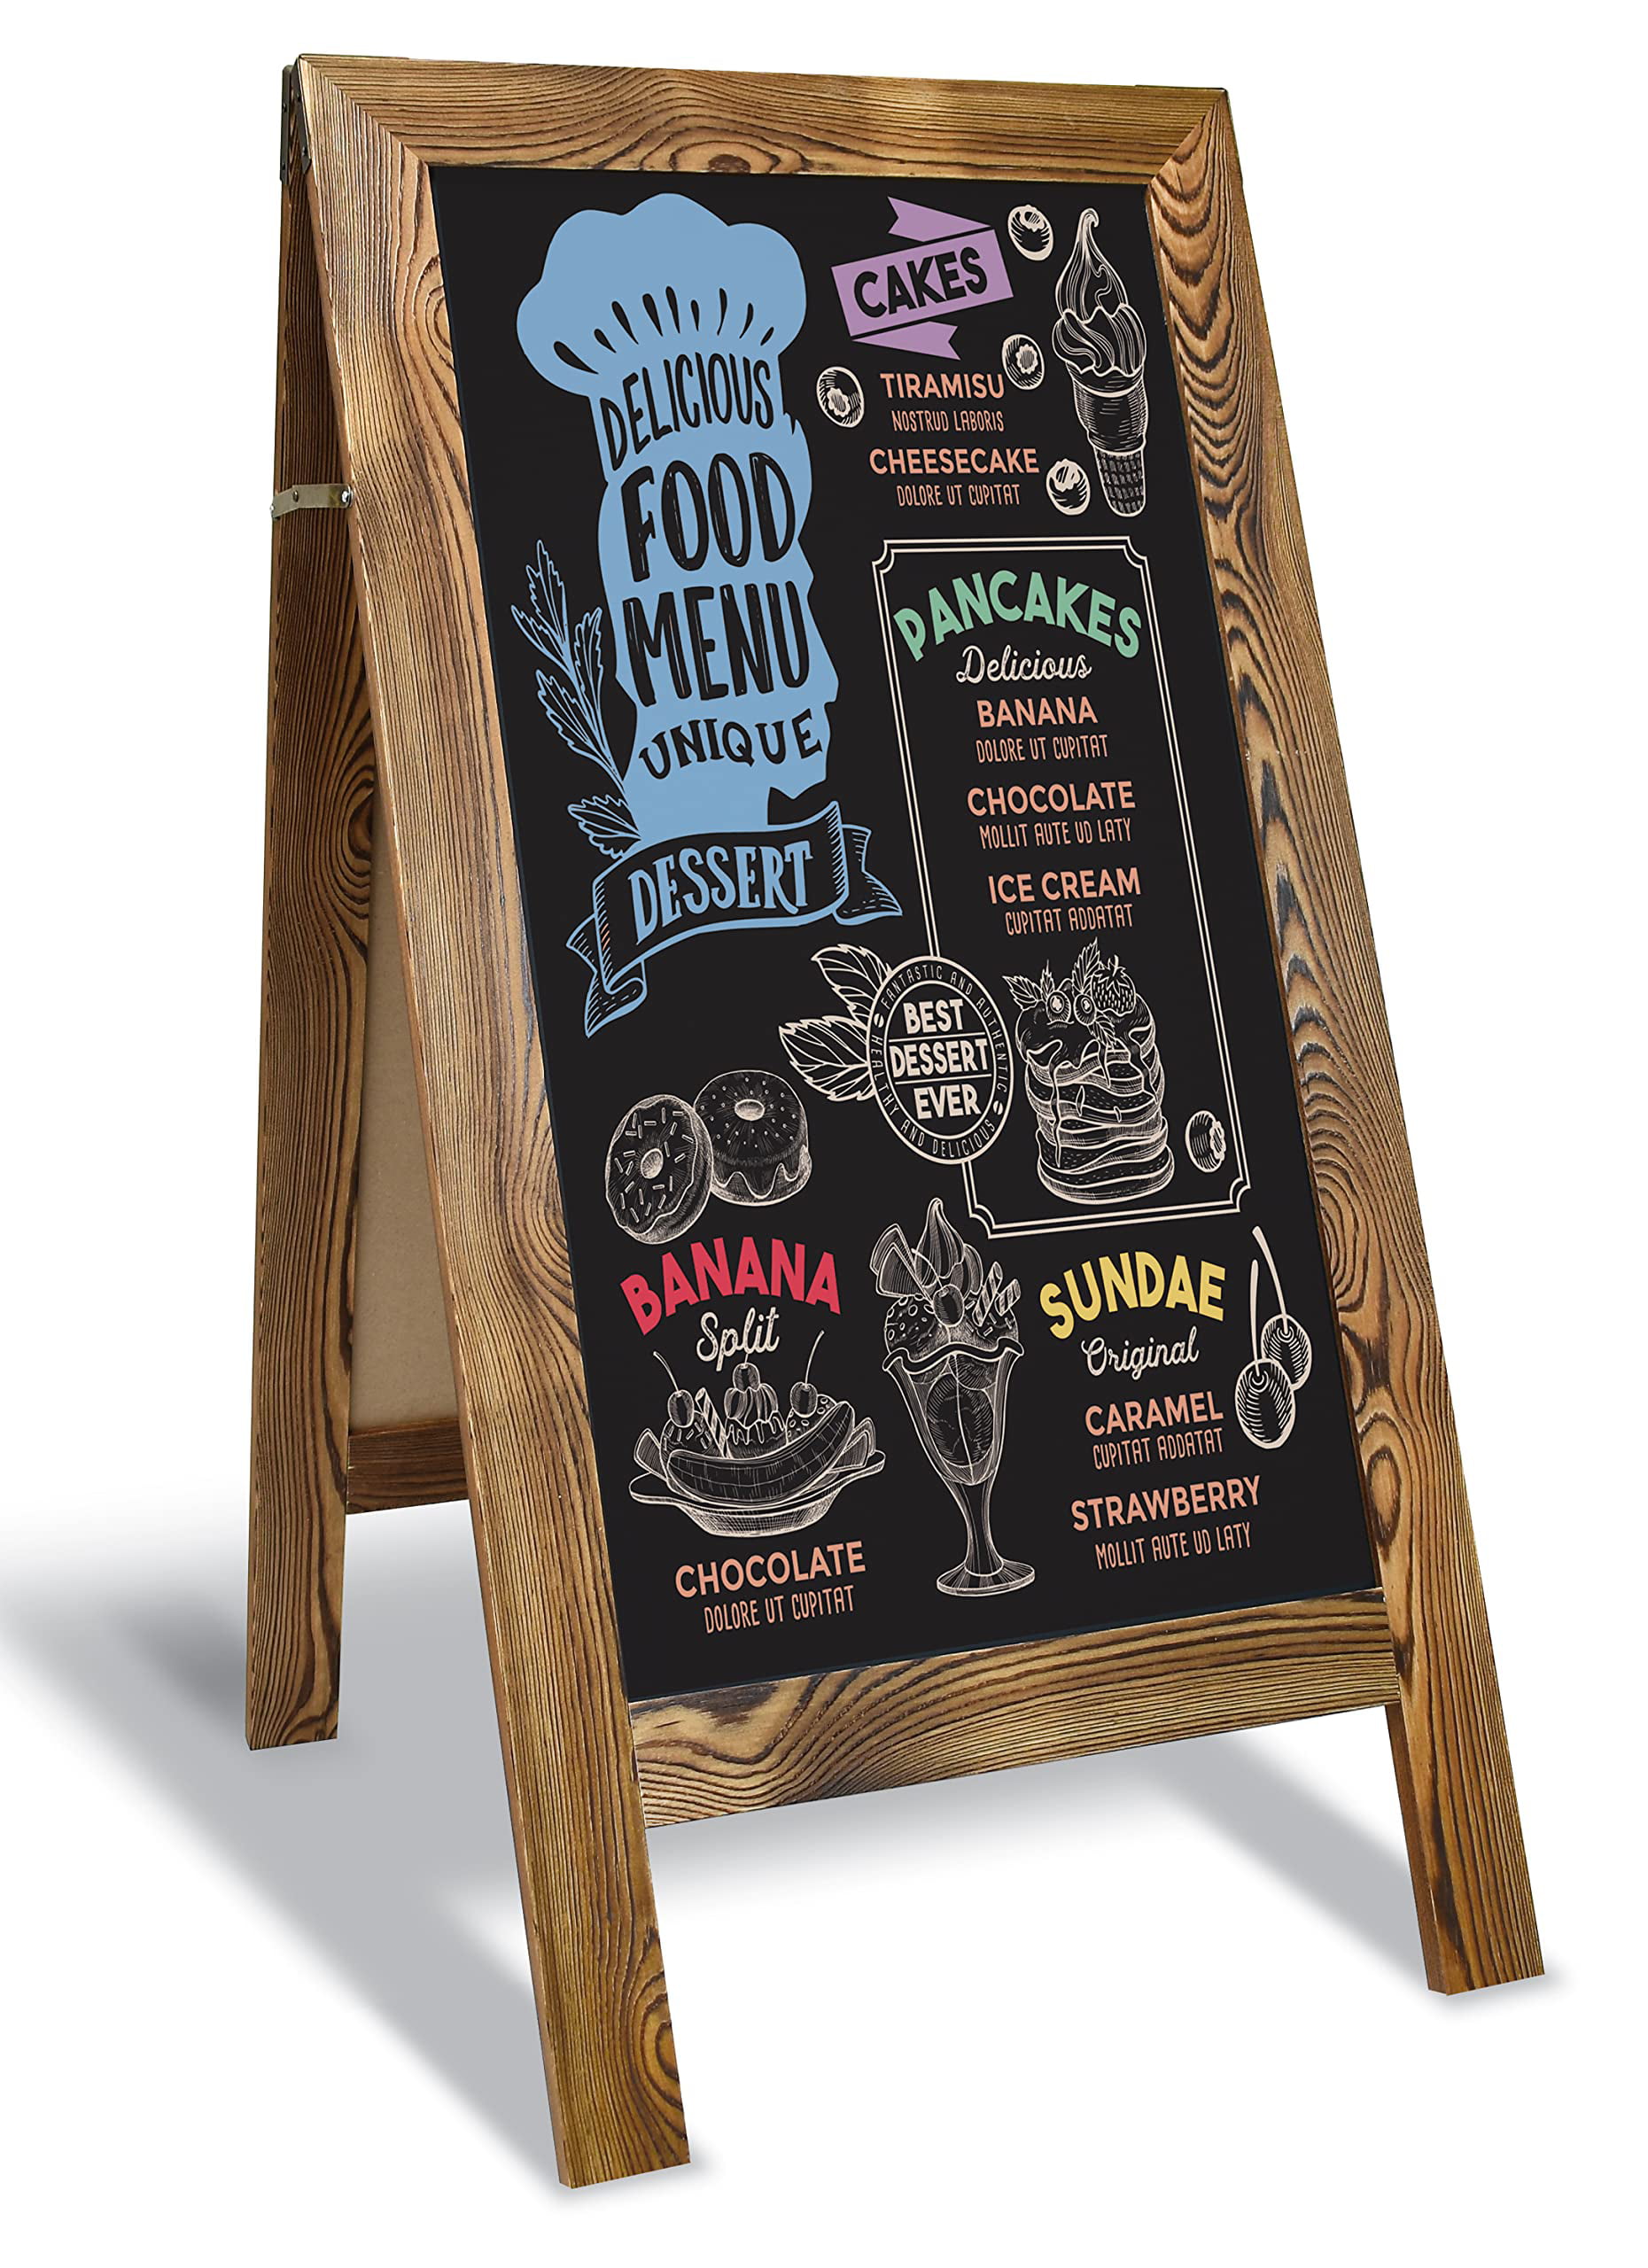 OleOletOy Bundle- 40 Mini Chalkboard Signs for Food: 30 Framed Small  Chalkboard Labels with Easel Stand & 10 with Pole, Wooden Blackboard Table